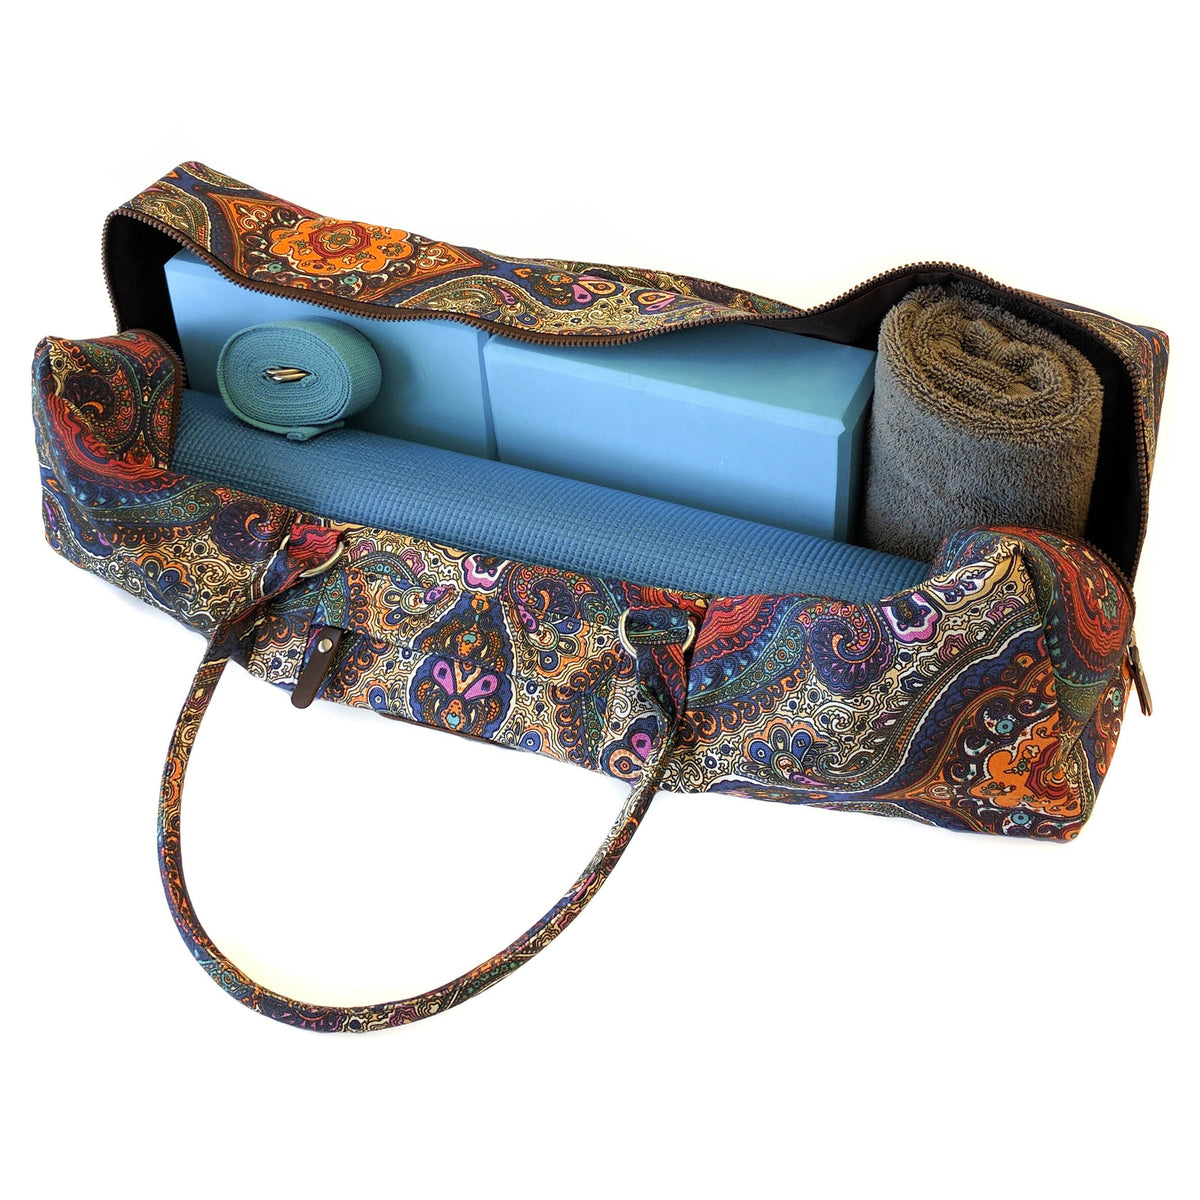 Yoga Bags & Carriers - Yoga-Mad - Mad-HQ